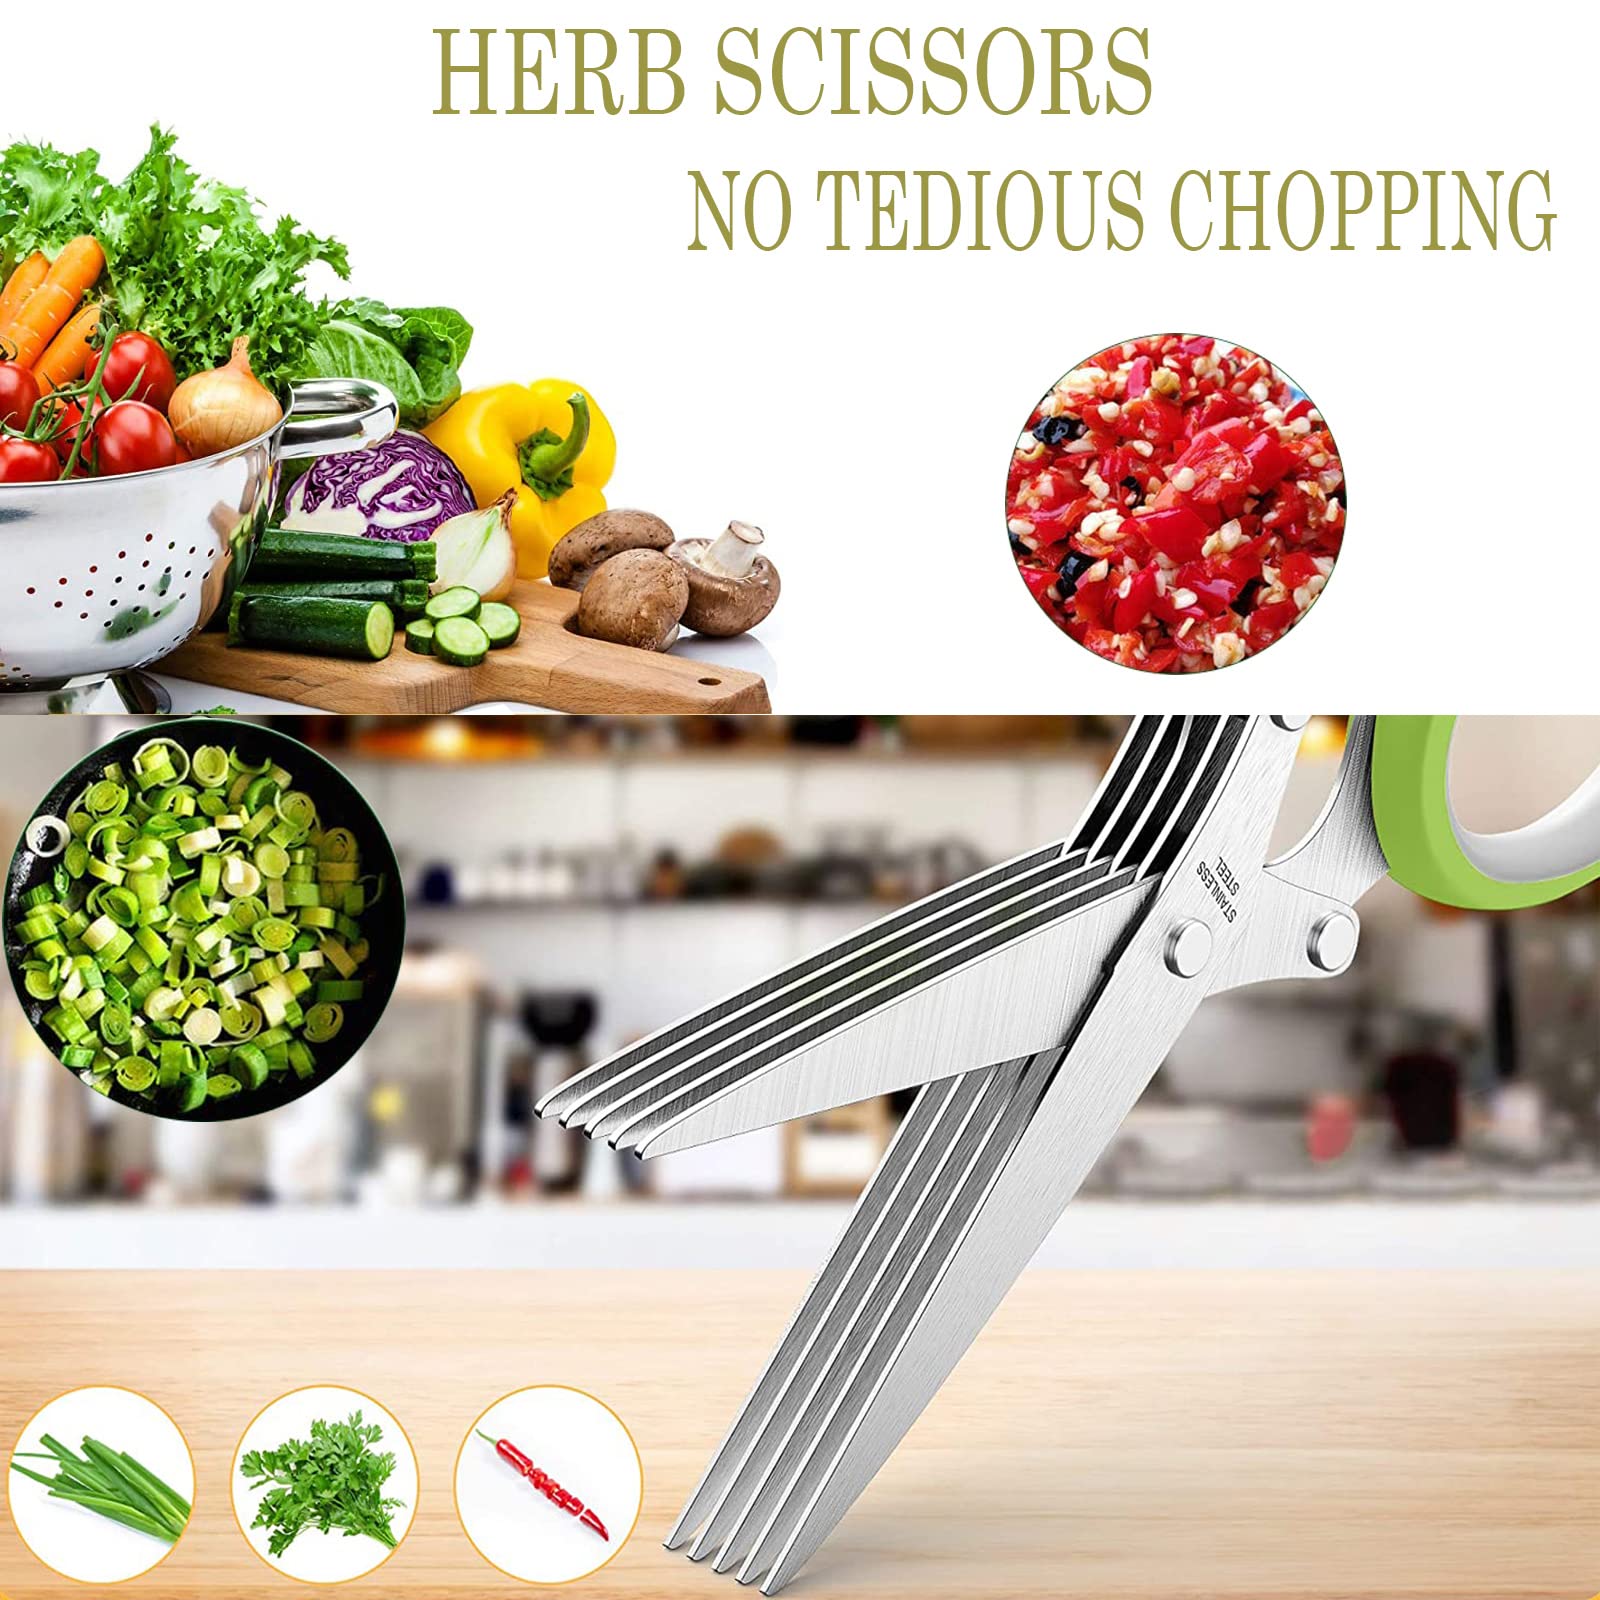 Updated Herb Scissors with 5 Blades and Cover, Kitchen Shears for Cutting Herbs, Kitchen Gadgets Cutter Chopper Food Cutter Scissors for Cilantro and Green Onion, Vegetable Salad Food Cutter (Green)